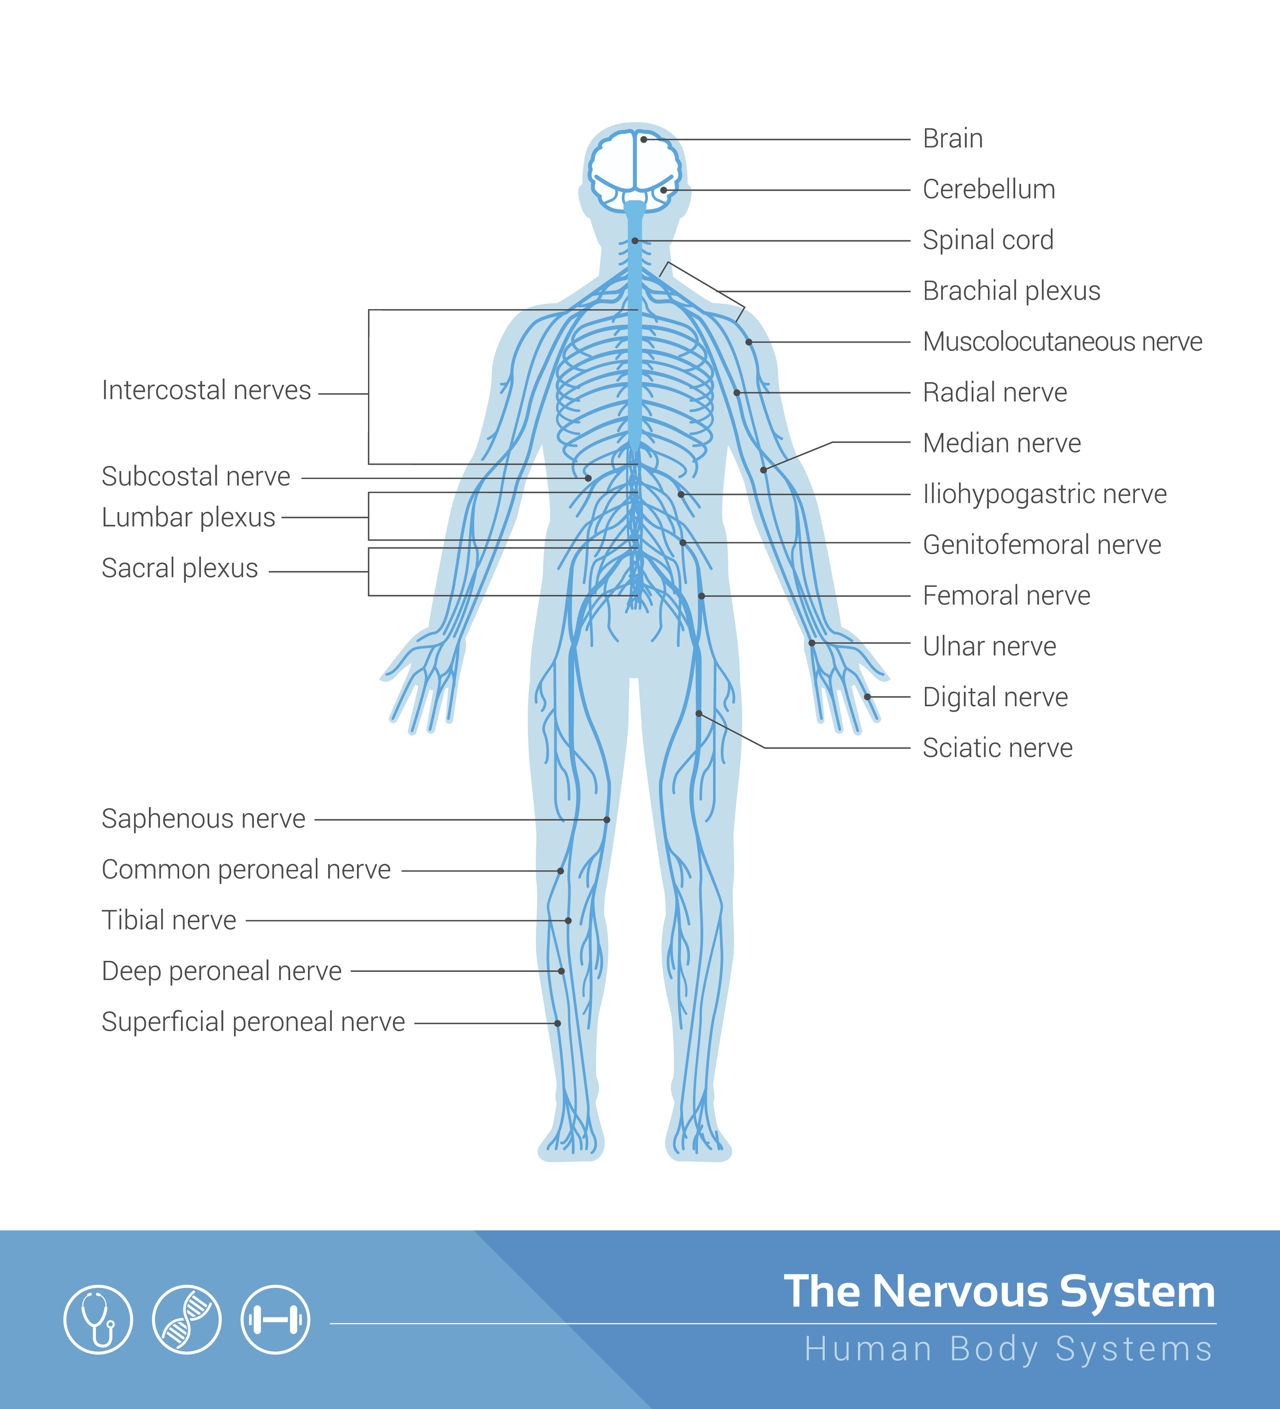 Human Nervous System Structure And Functions Explained With Diagrams